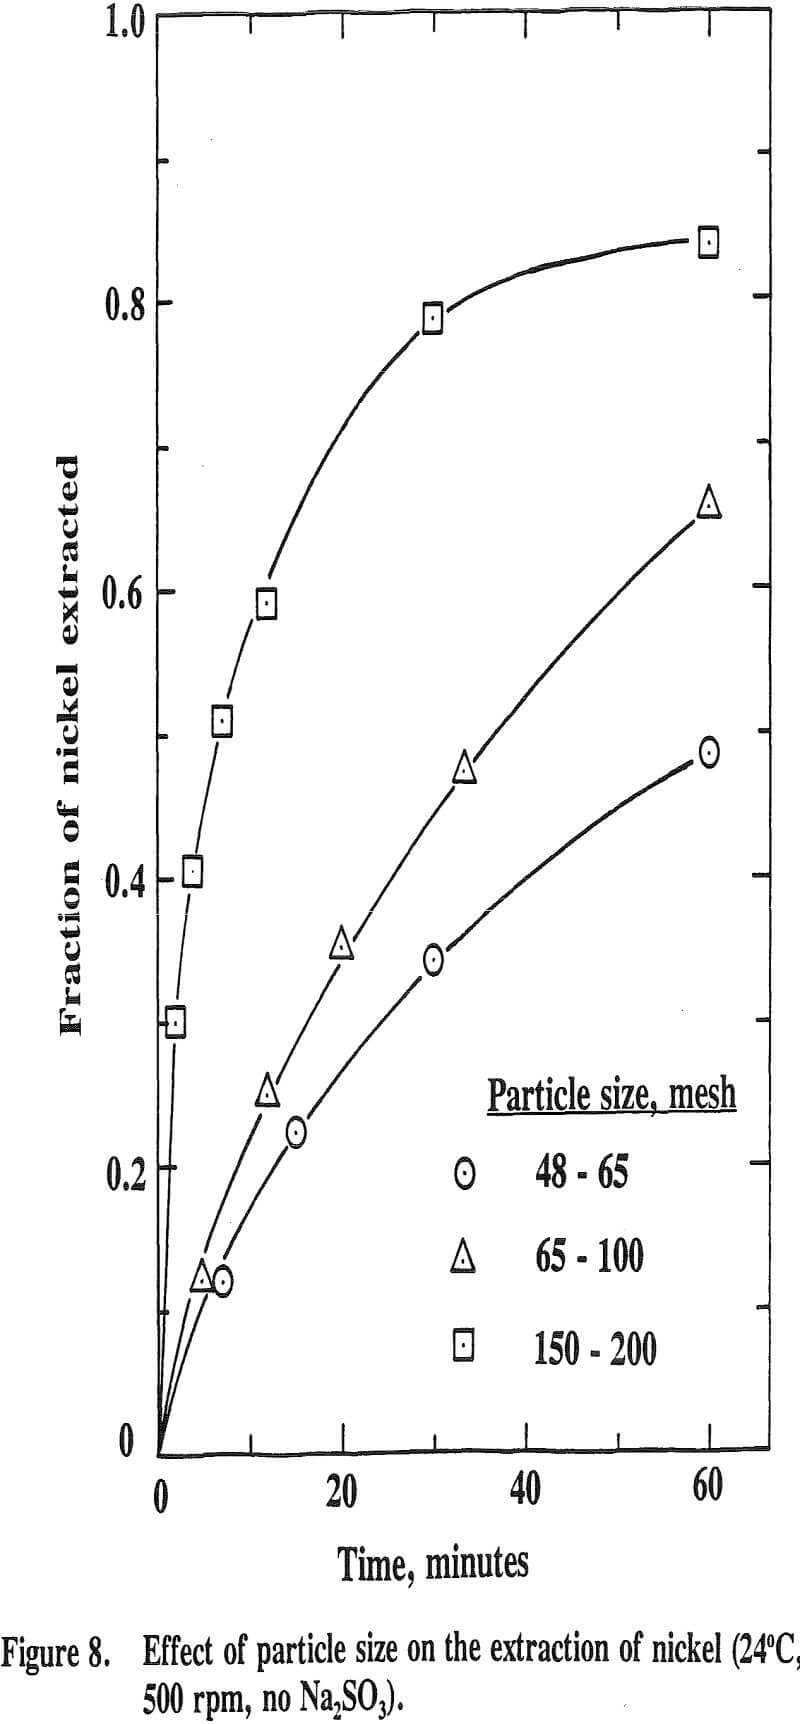 acid mine drainage effect of particle size